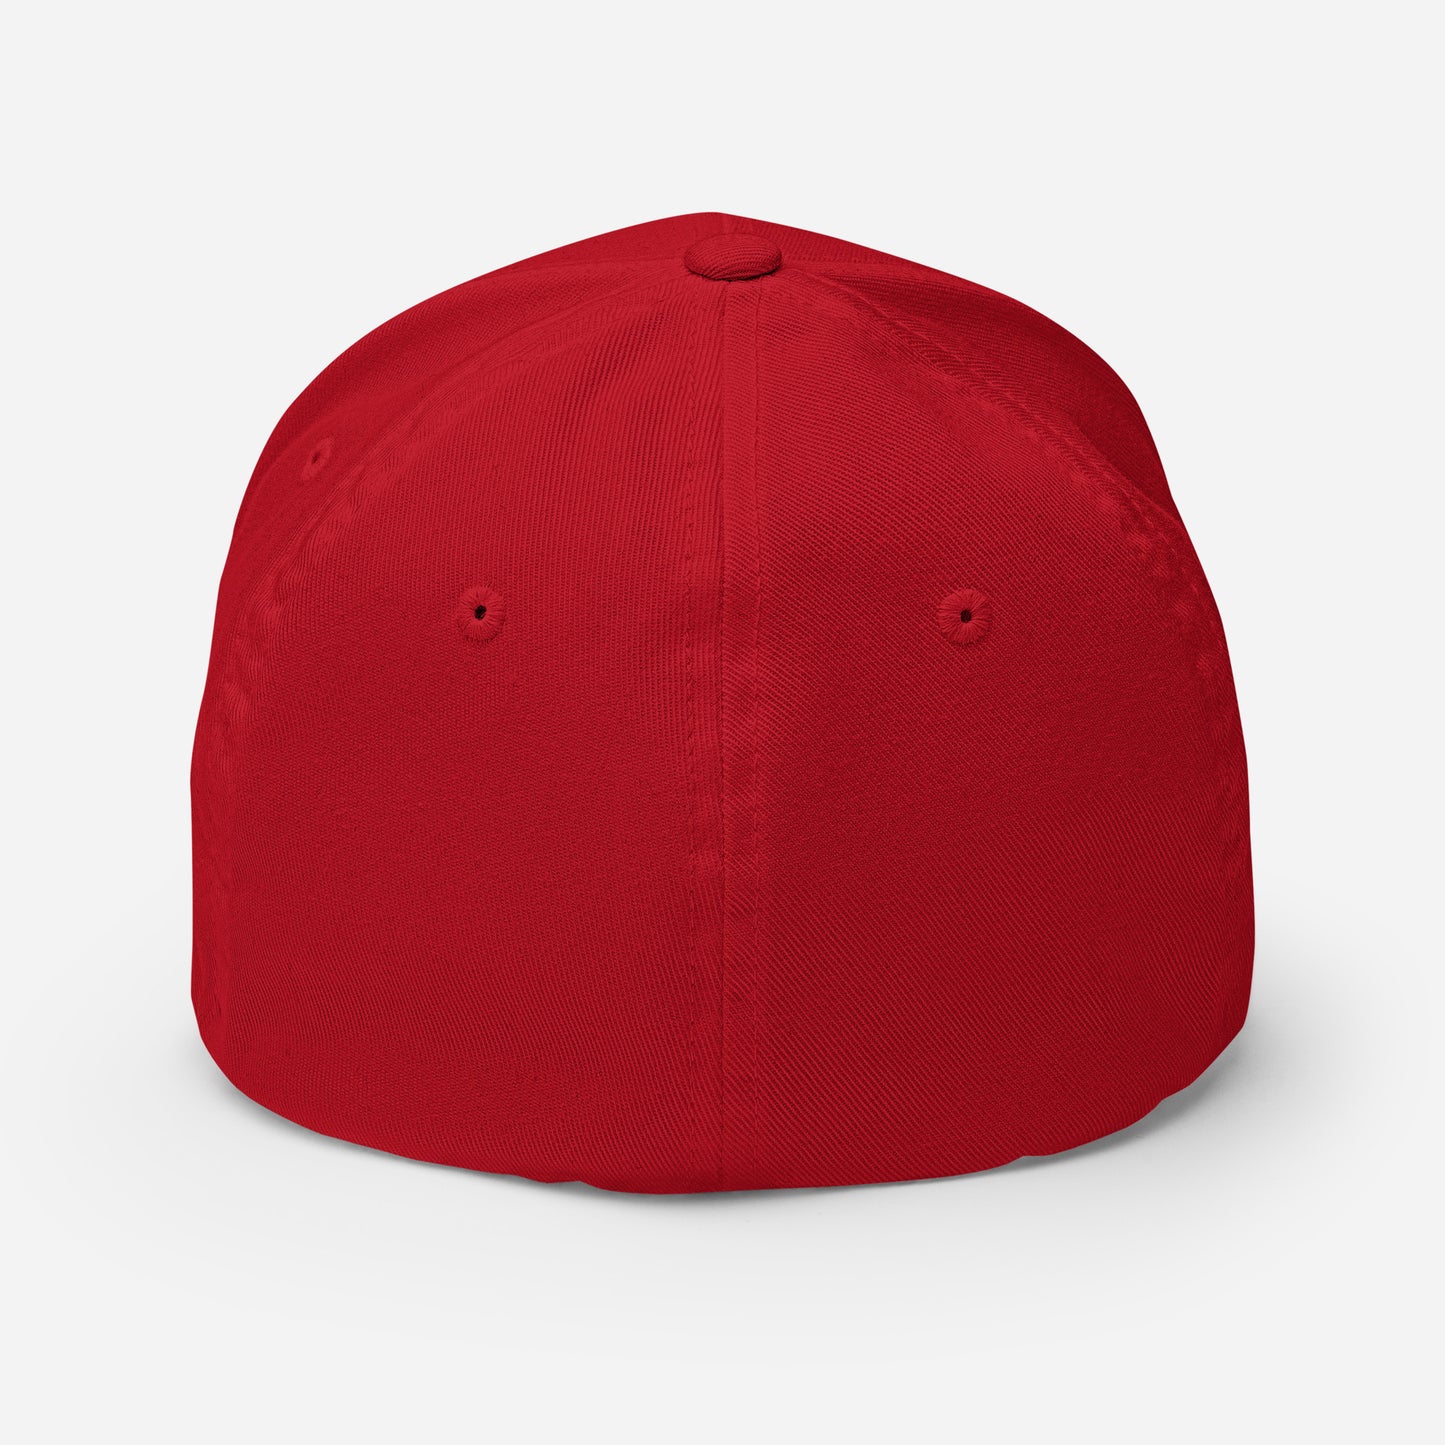 cap-from-the-back-with-swiss-flag